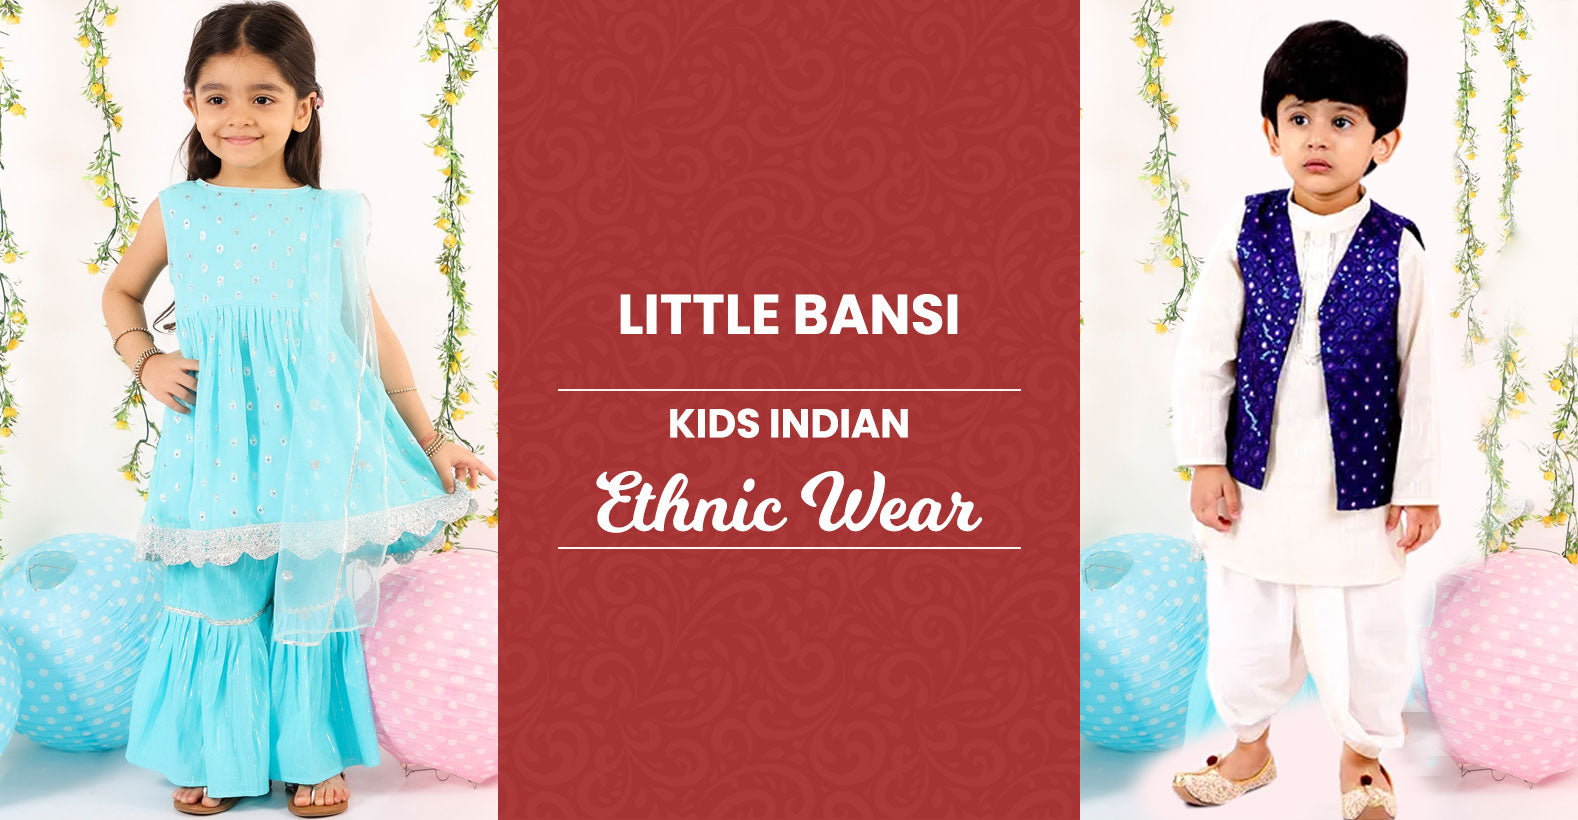 Ethnic Indian Dress For Kids From Little Bansi